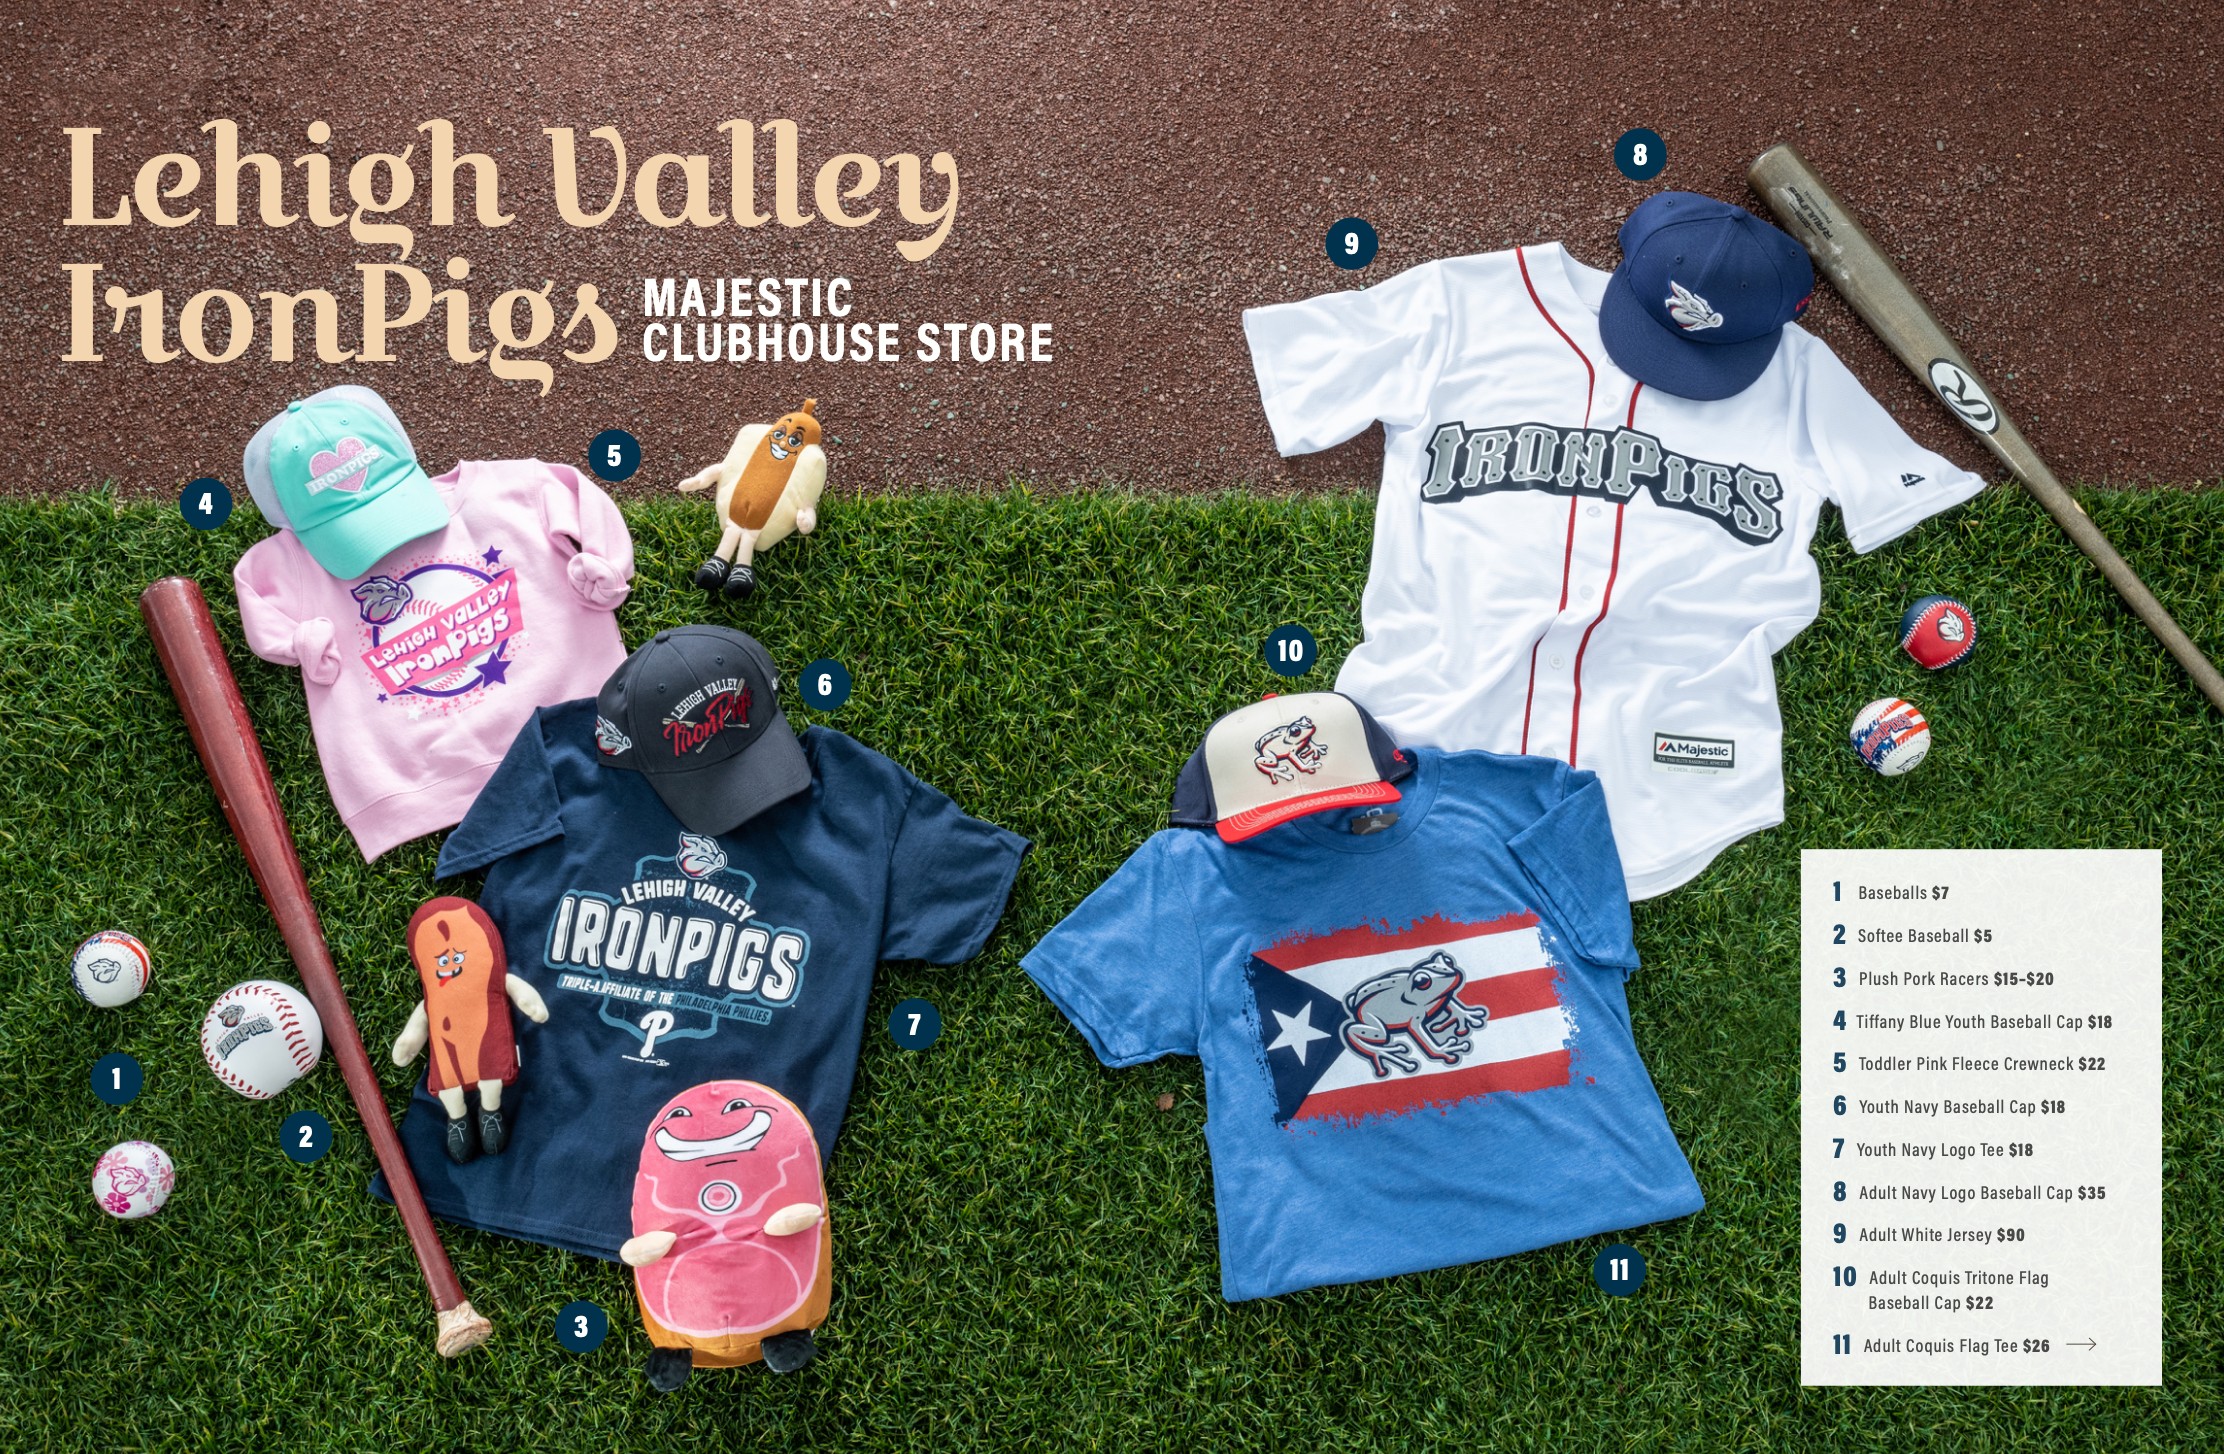 Lehigh Valley IronPigs Majestic Clubhouse Store - Lehigh Valley